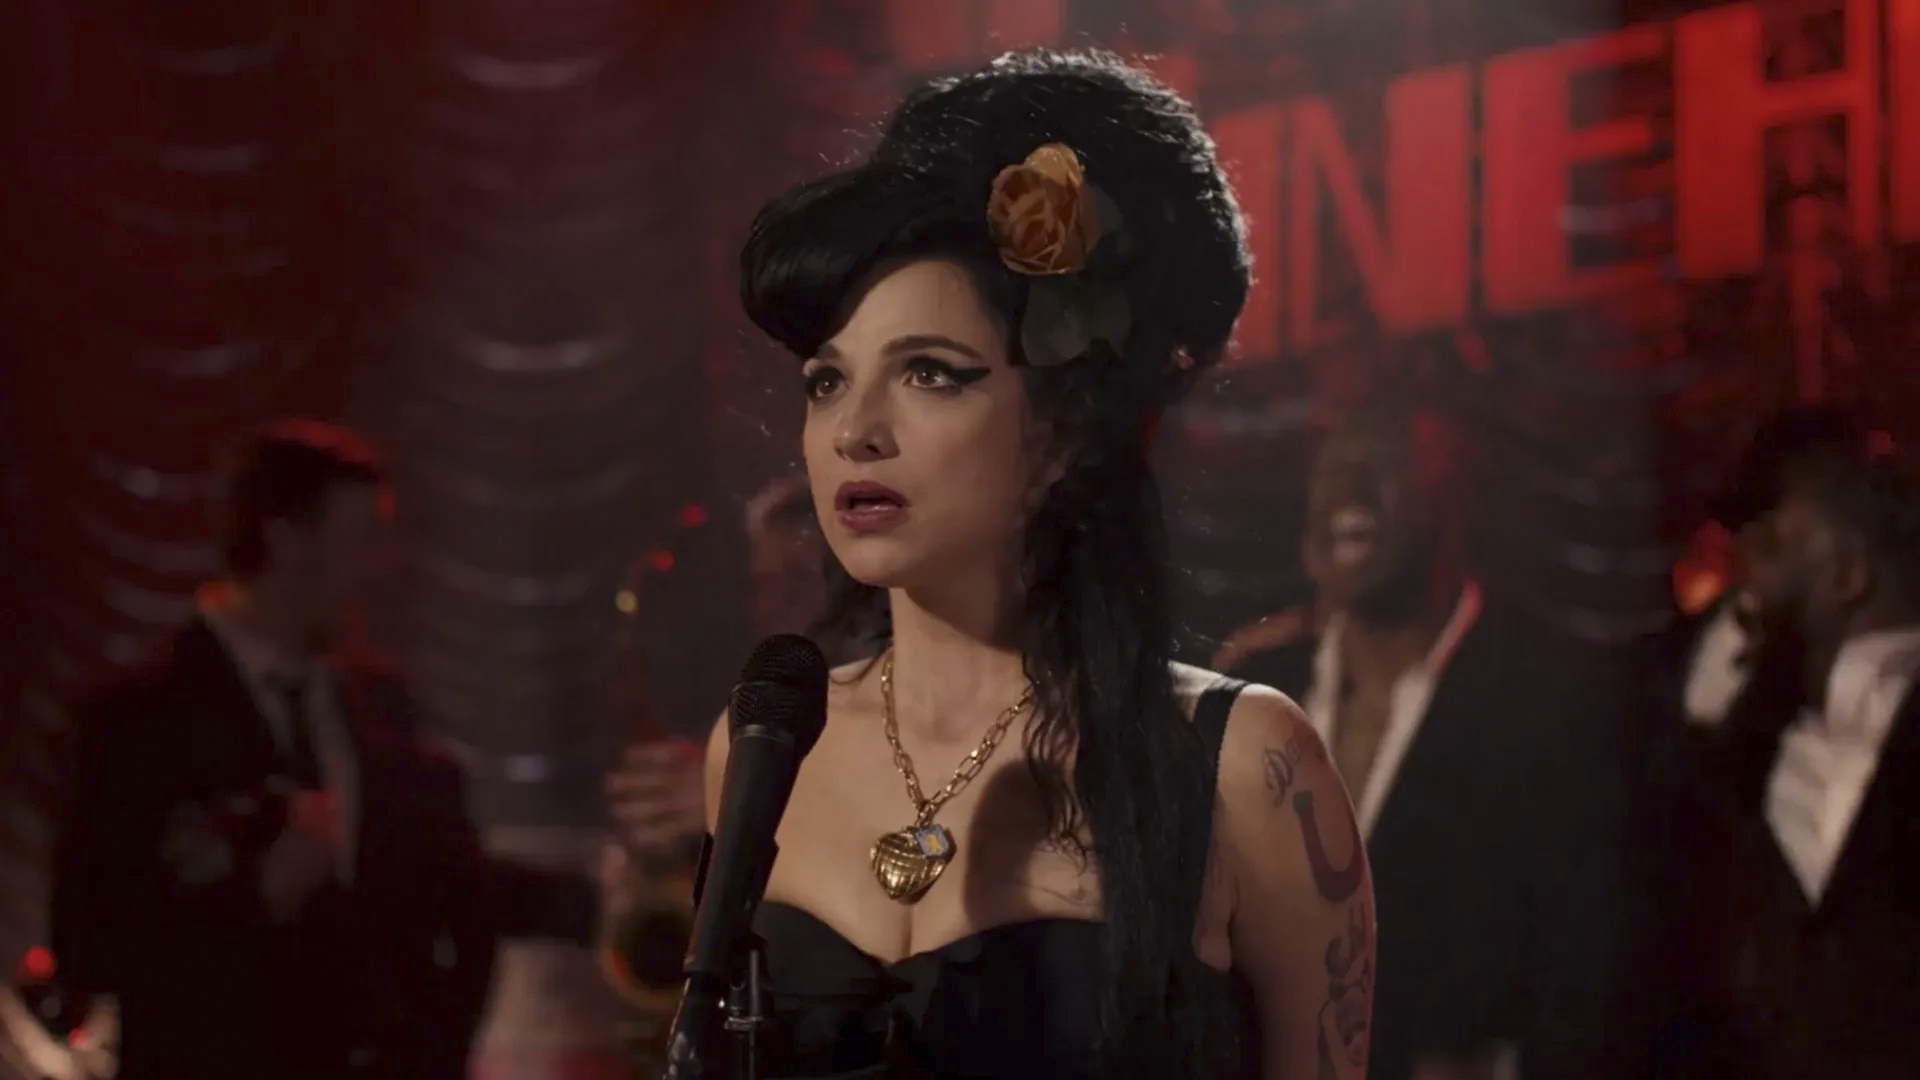 Marisa Abela as Amy Winehouse in 'Back to Black'.